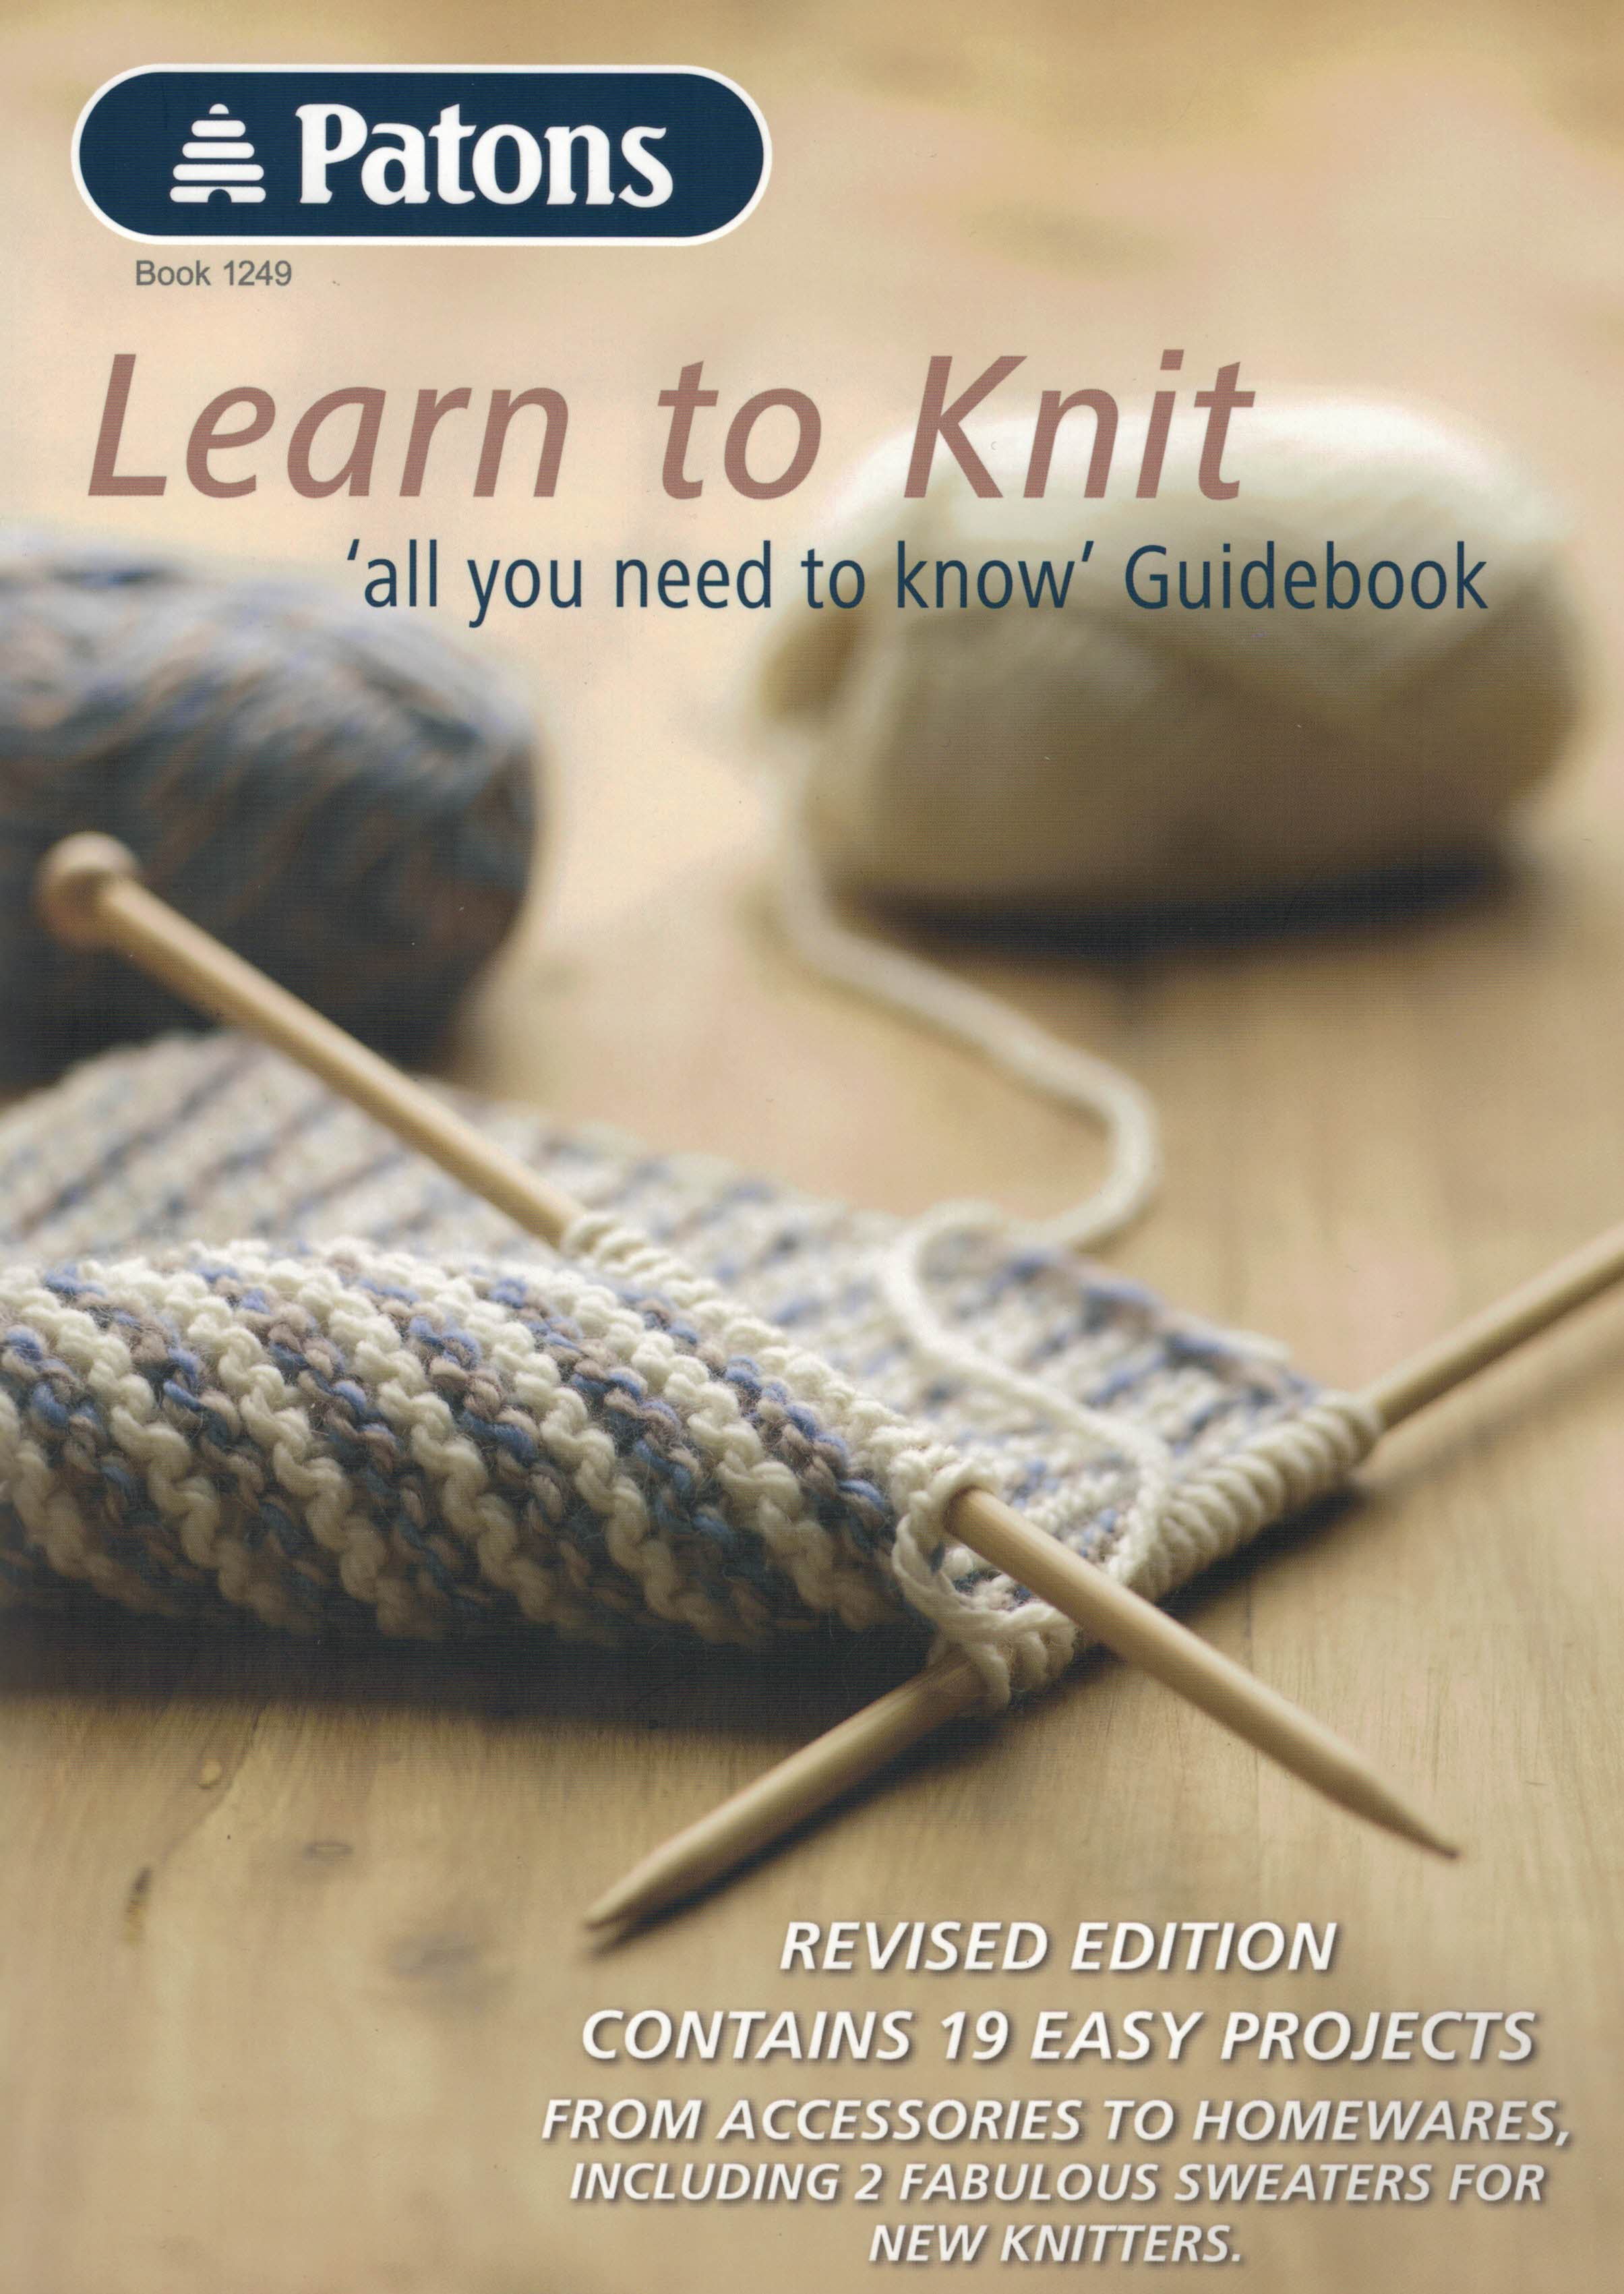 Patons Learn to Crochet Guidebook